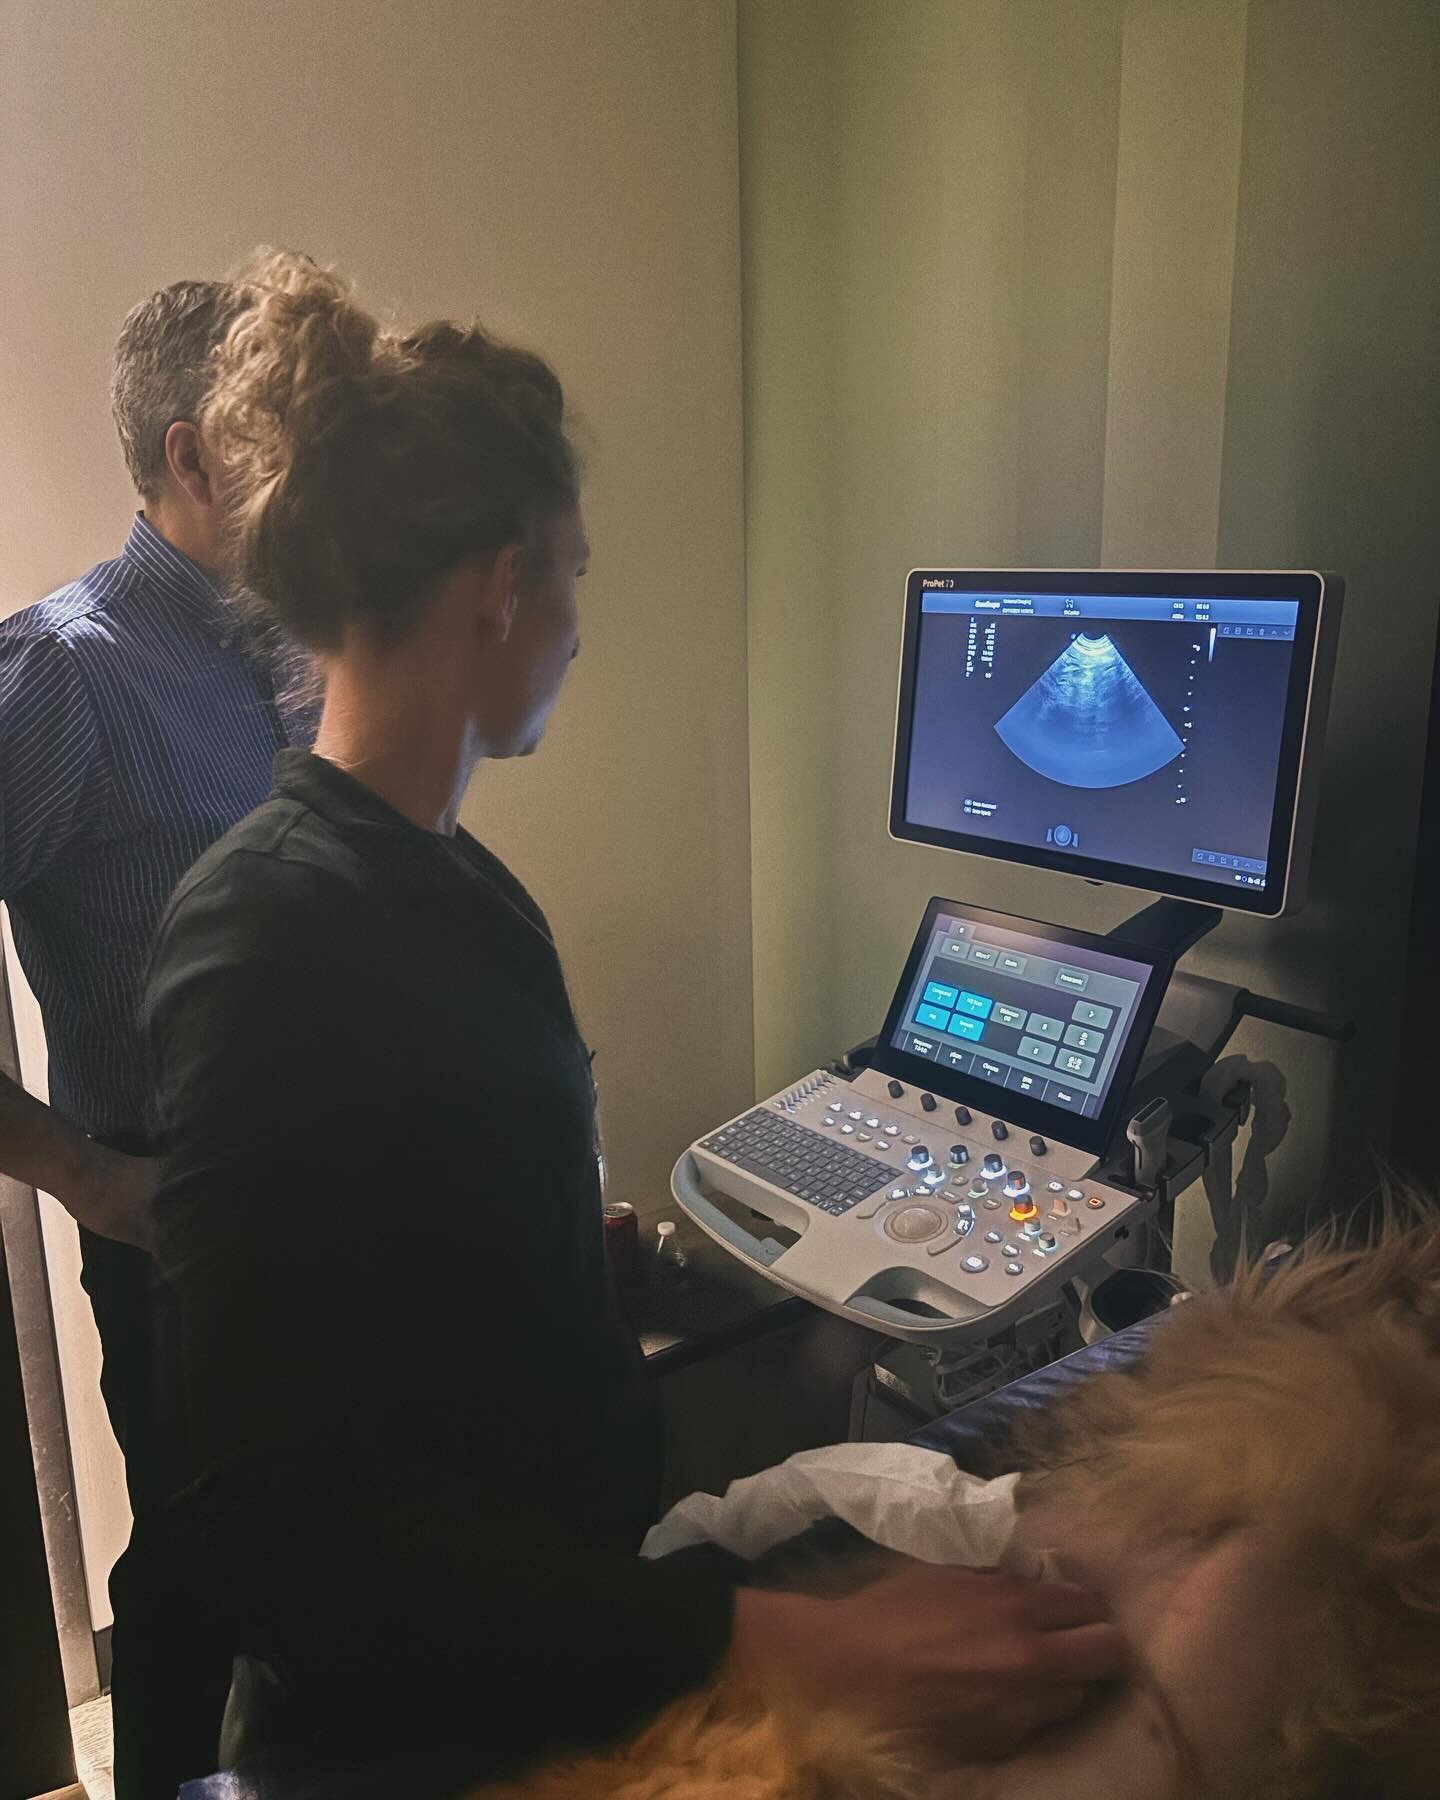 This weekend our own Dr. Beins attended an abdominal ultrasound workshop in Chicago with Universal Imaging! She is excited to share updates and be able to diagnose more with this great tool. #continuingeducation #ultrasound